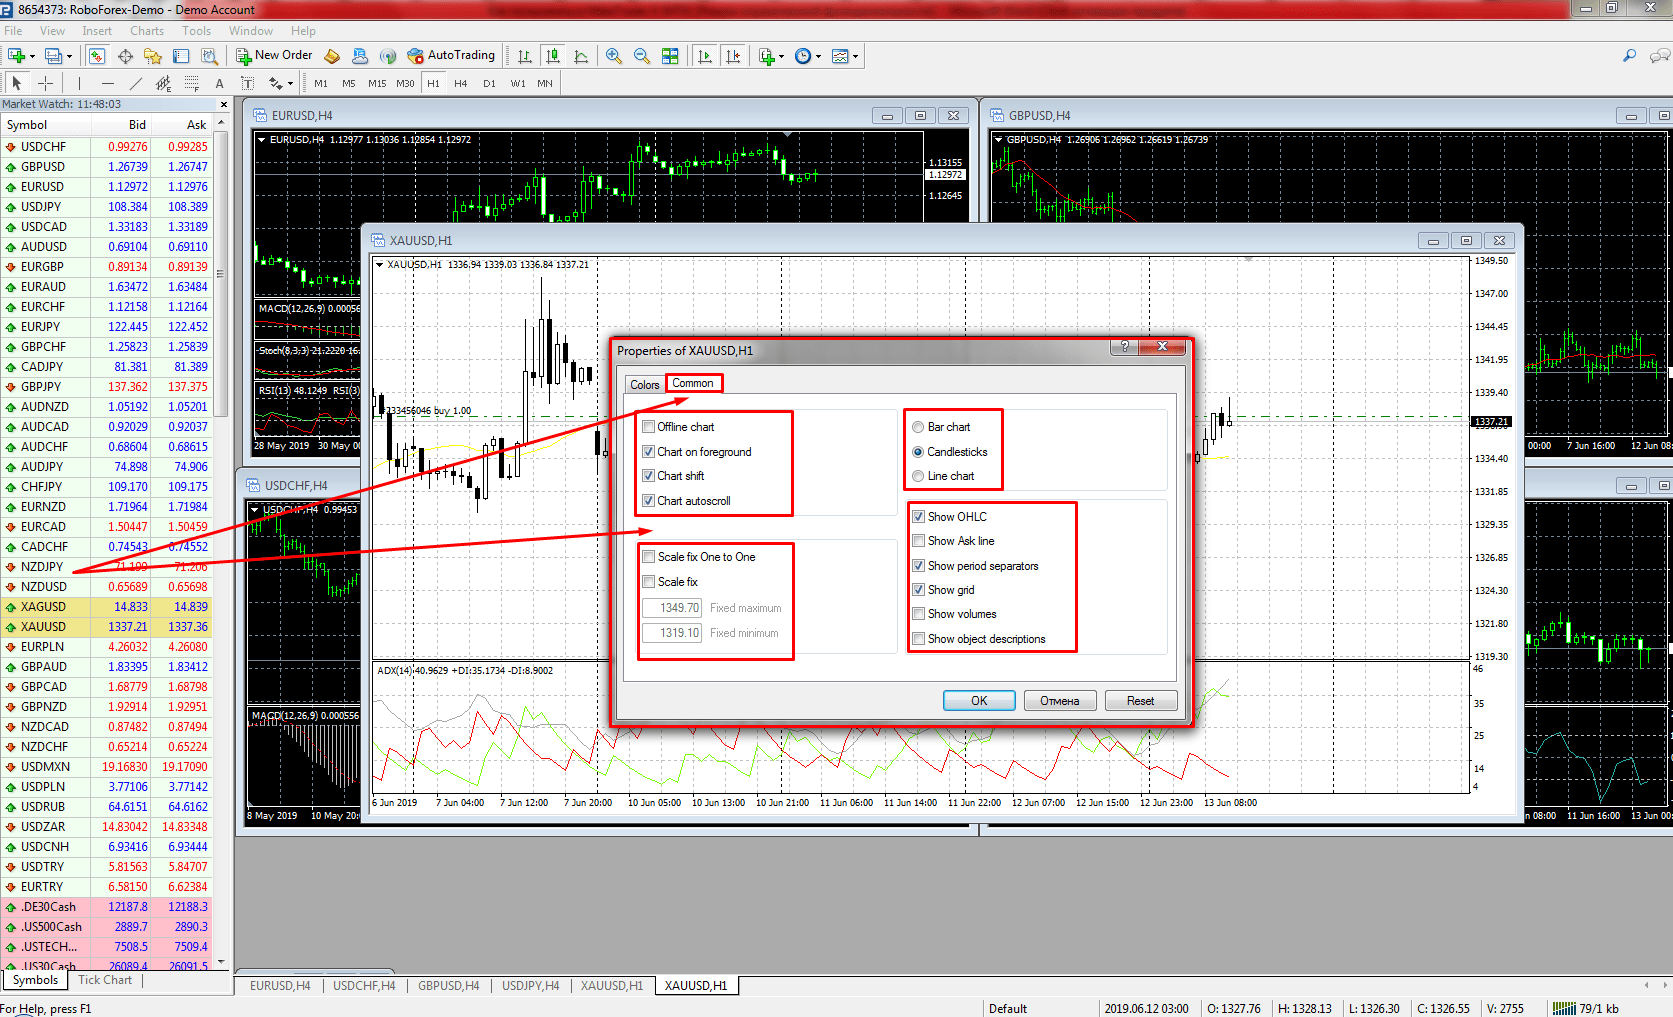 How to Use MetaTrader 4 (MT4): Complete Guide for Beginners | R Blog - RoboForex